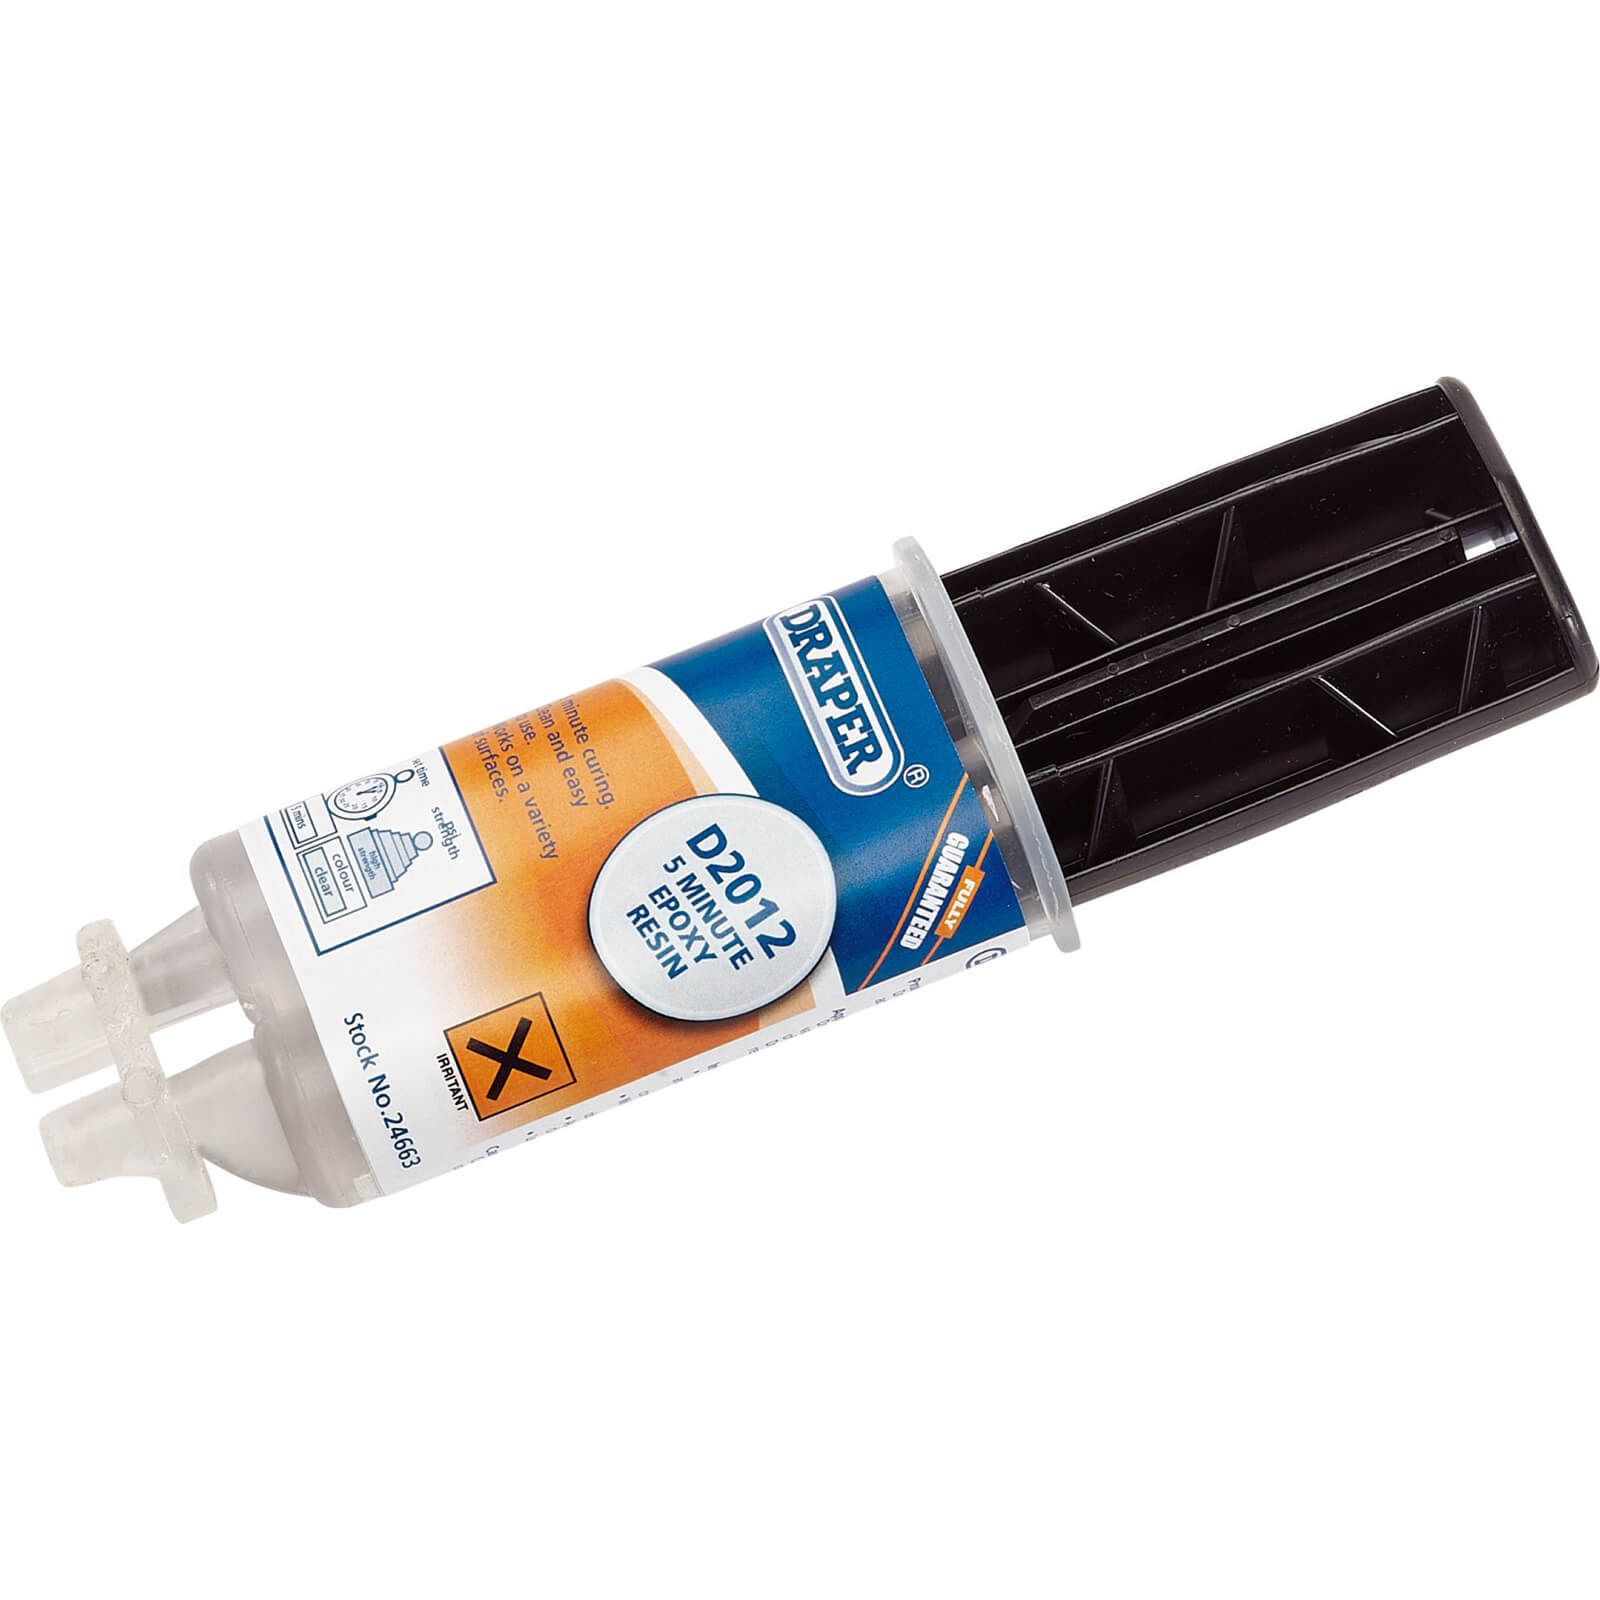 Image of Draper D2012 Epoxy Structural Adhesive 28ml